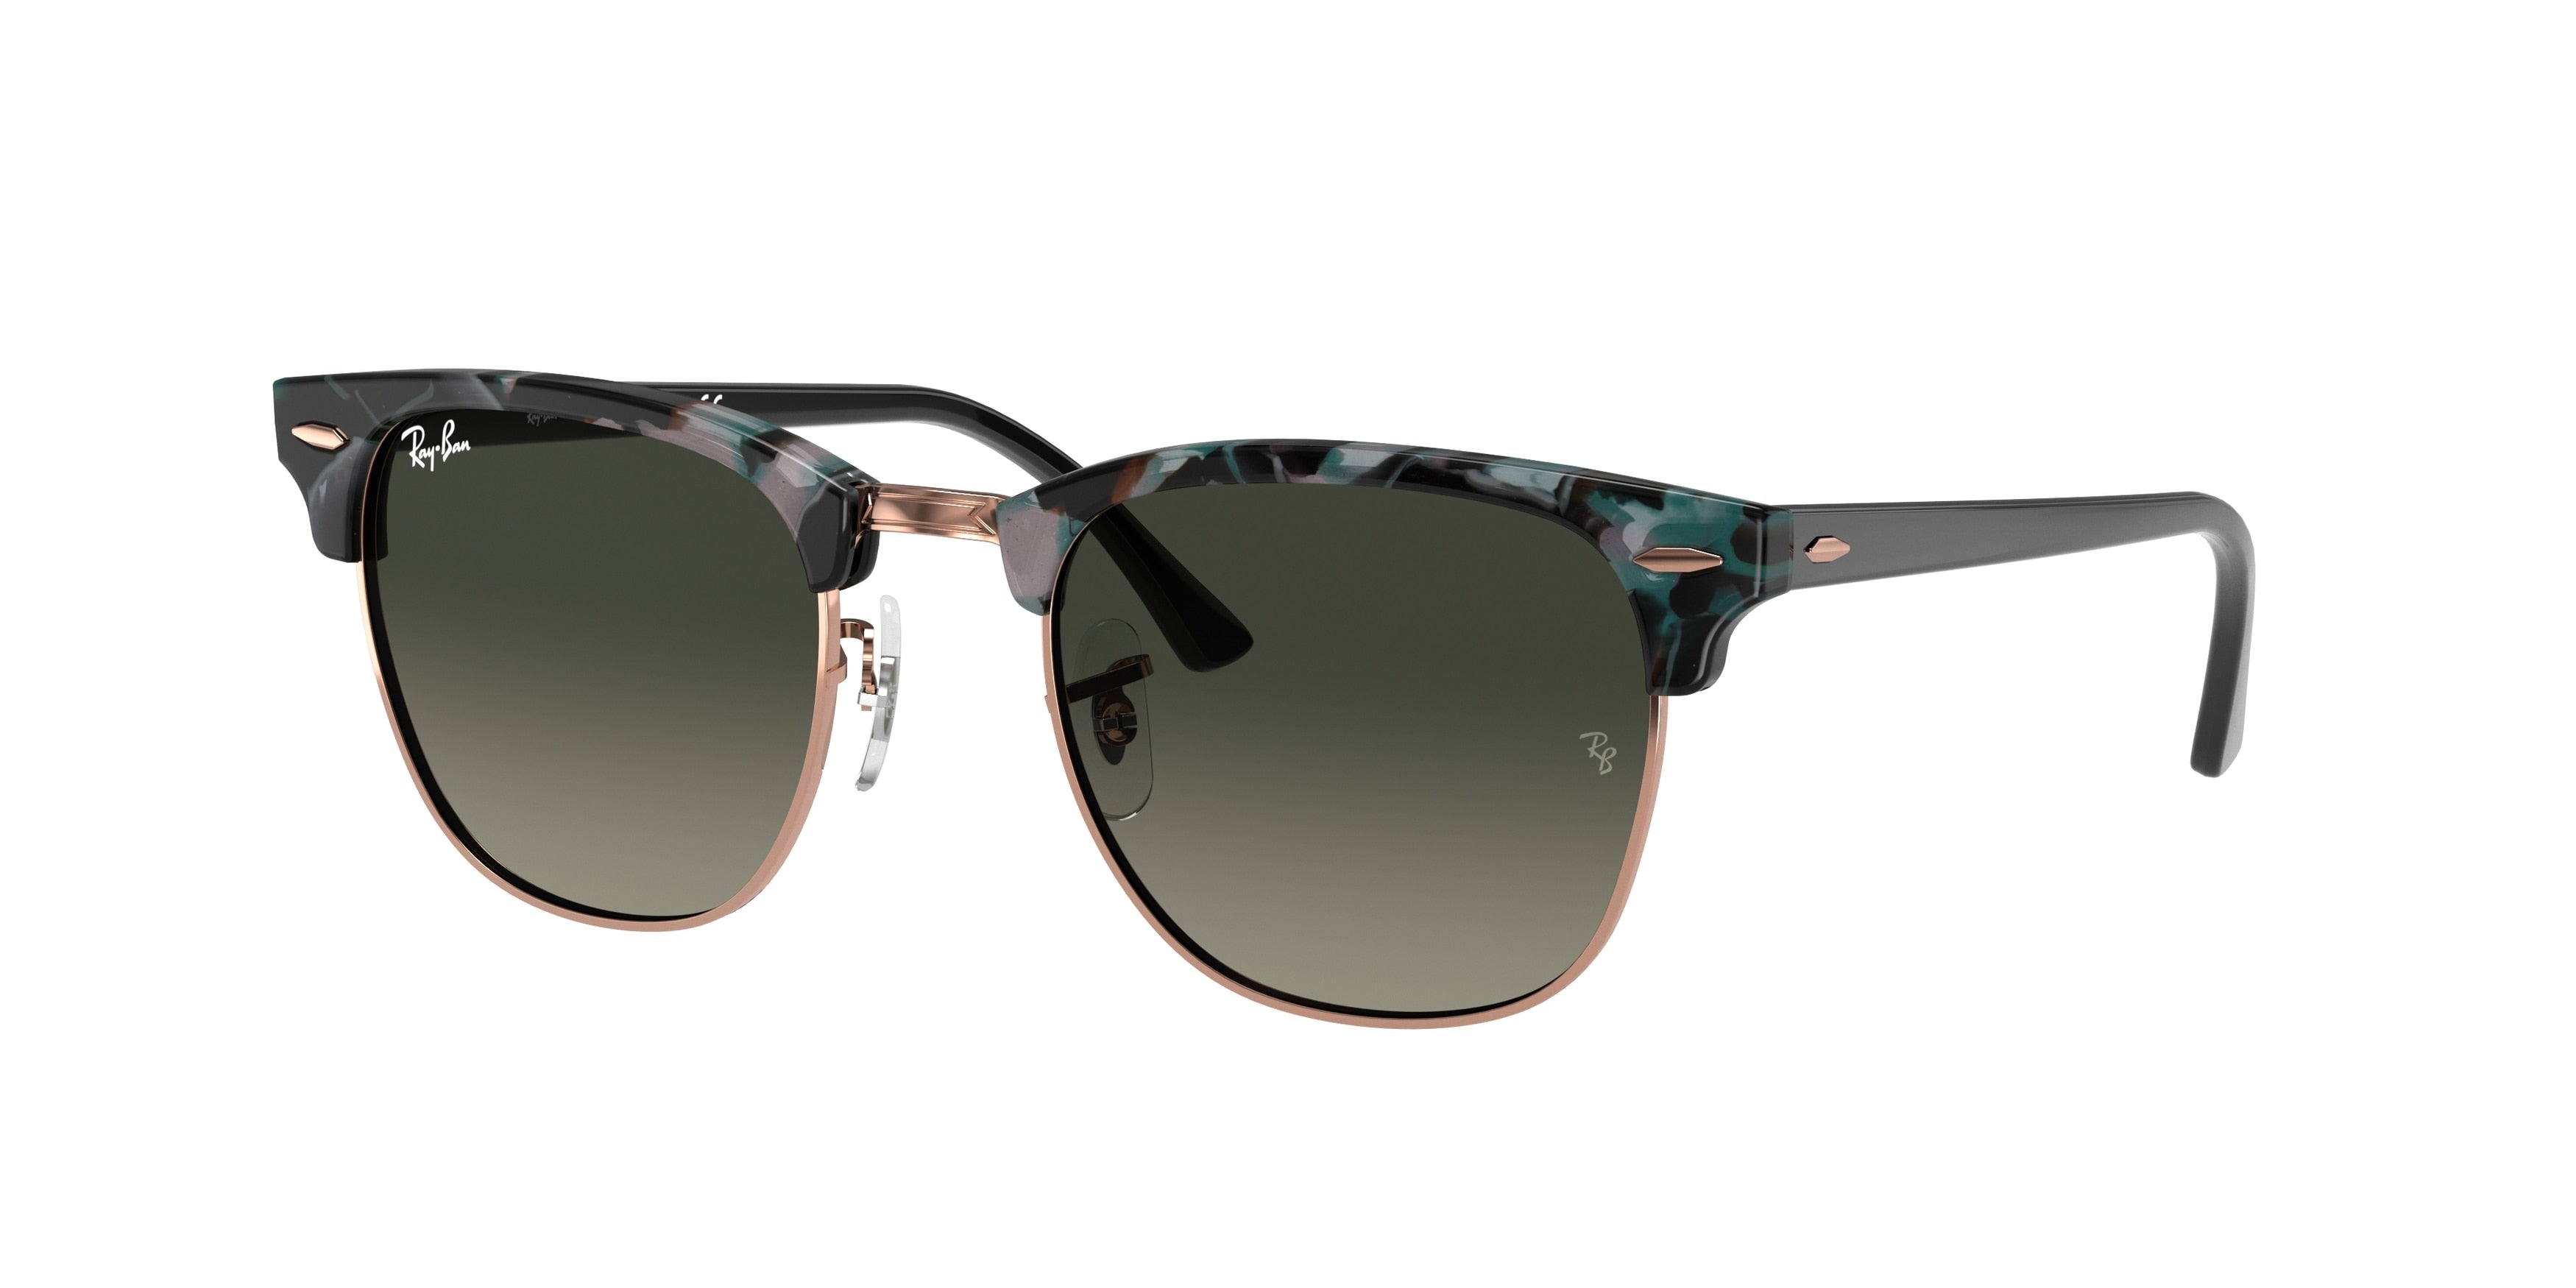 Ray-Ban CLUBMASTER RB3016 Square Sunglasses  125571-Grey Green 50-145-21 - Color Map Grey